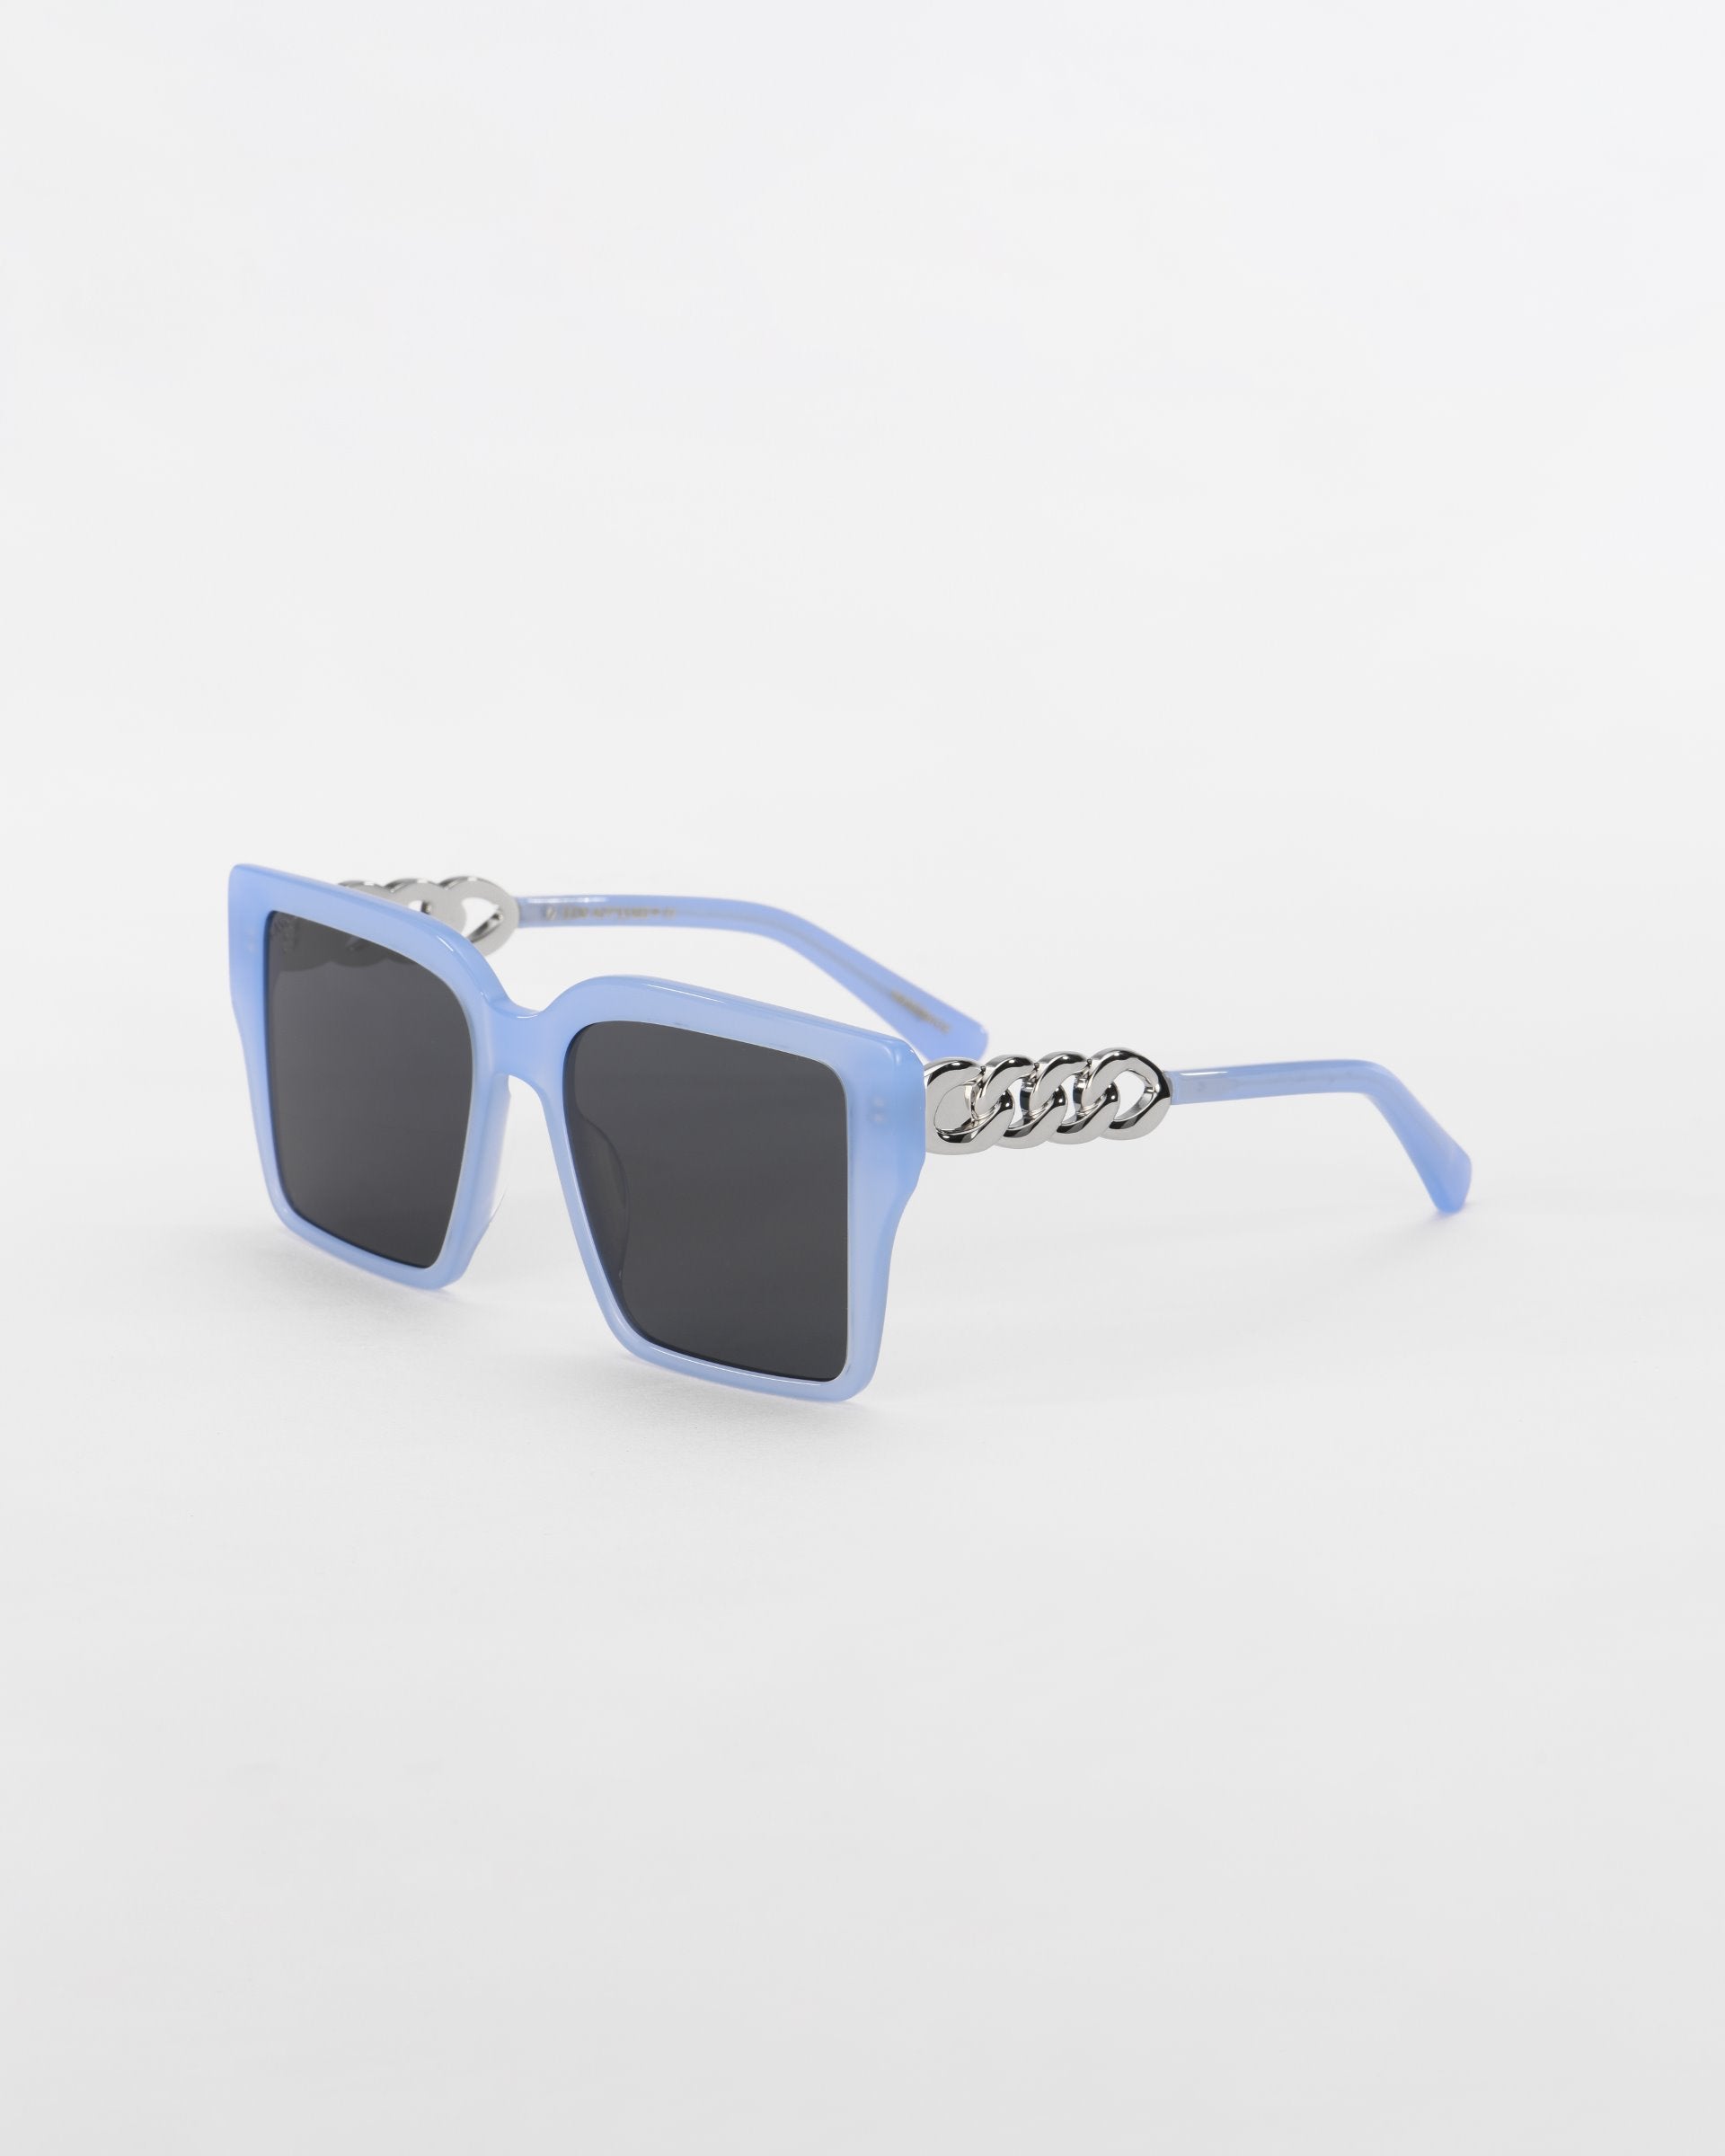 A pair of stylish, oversized square-shaped **Castle** sunglasses with light blue frames and ultra-lightweight dark lenses by **For Art&#39;s Sake®**. The arms feature an 18-karat gold plated chain detail near the hinges. The sunglasses are set against a plain white background.